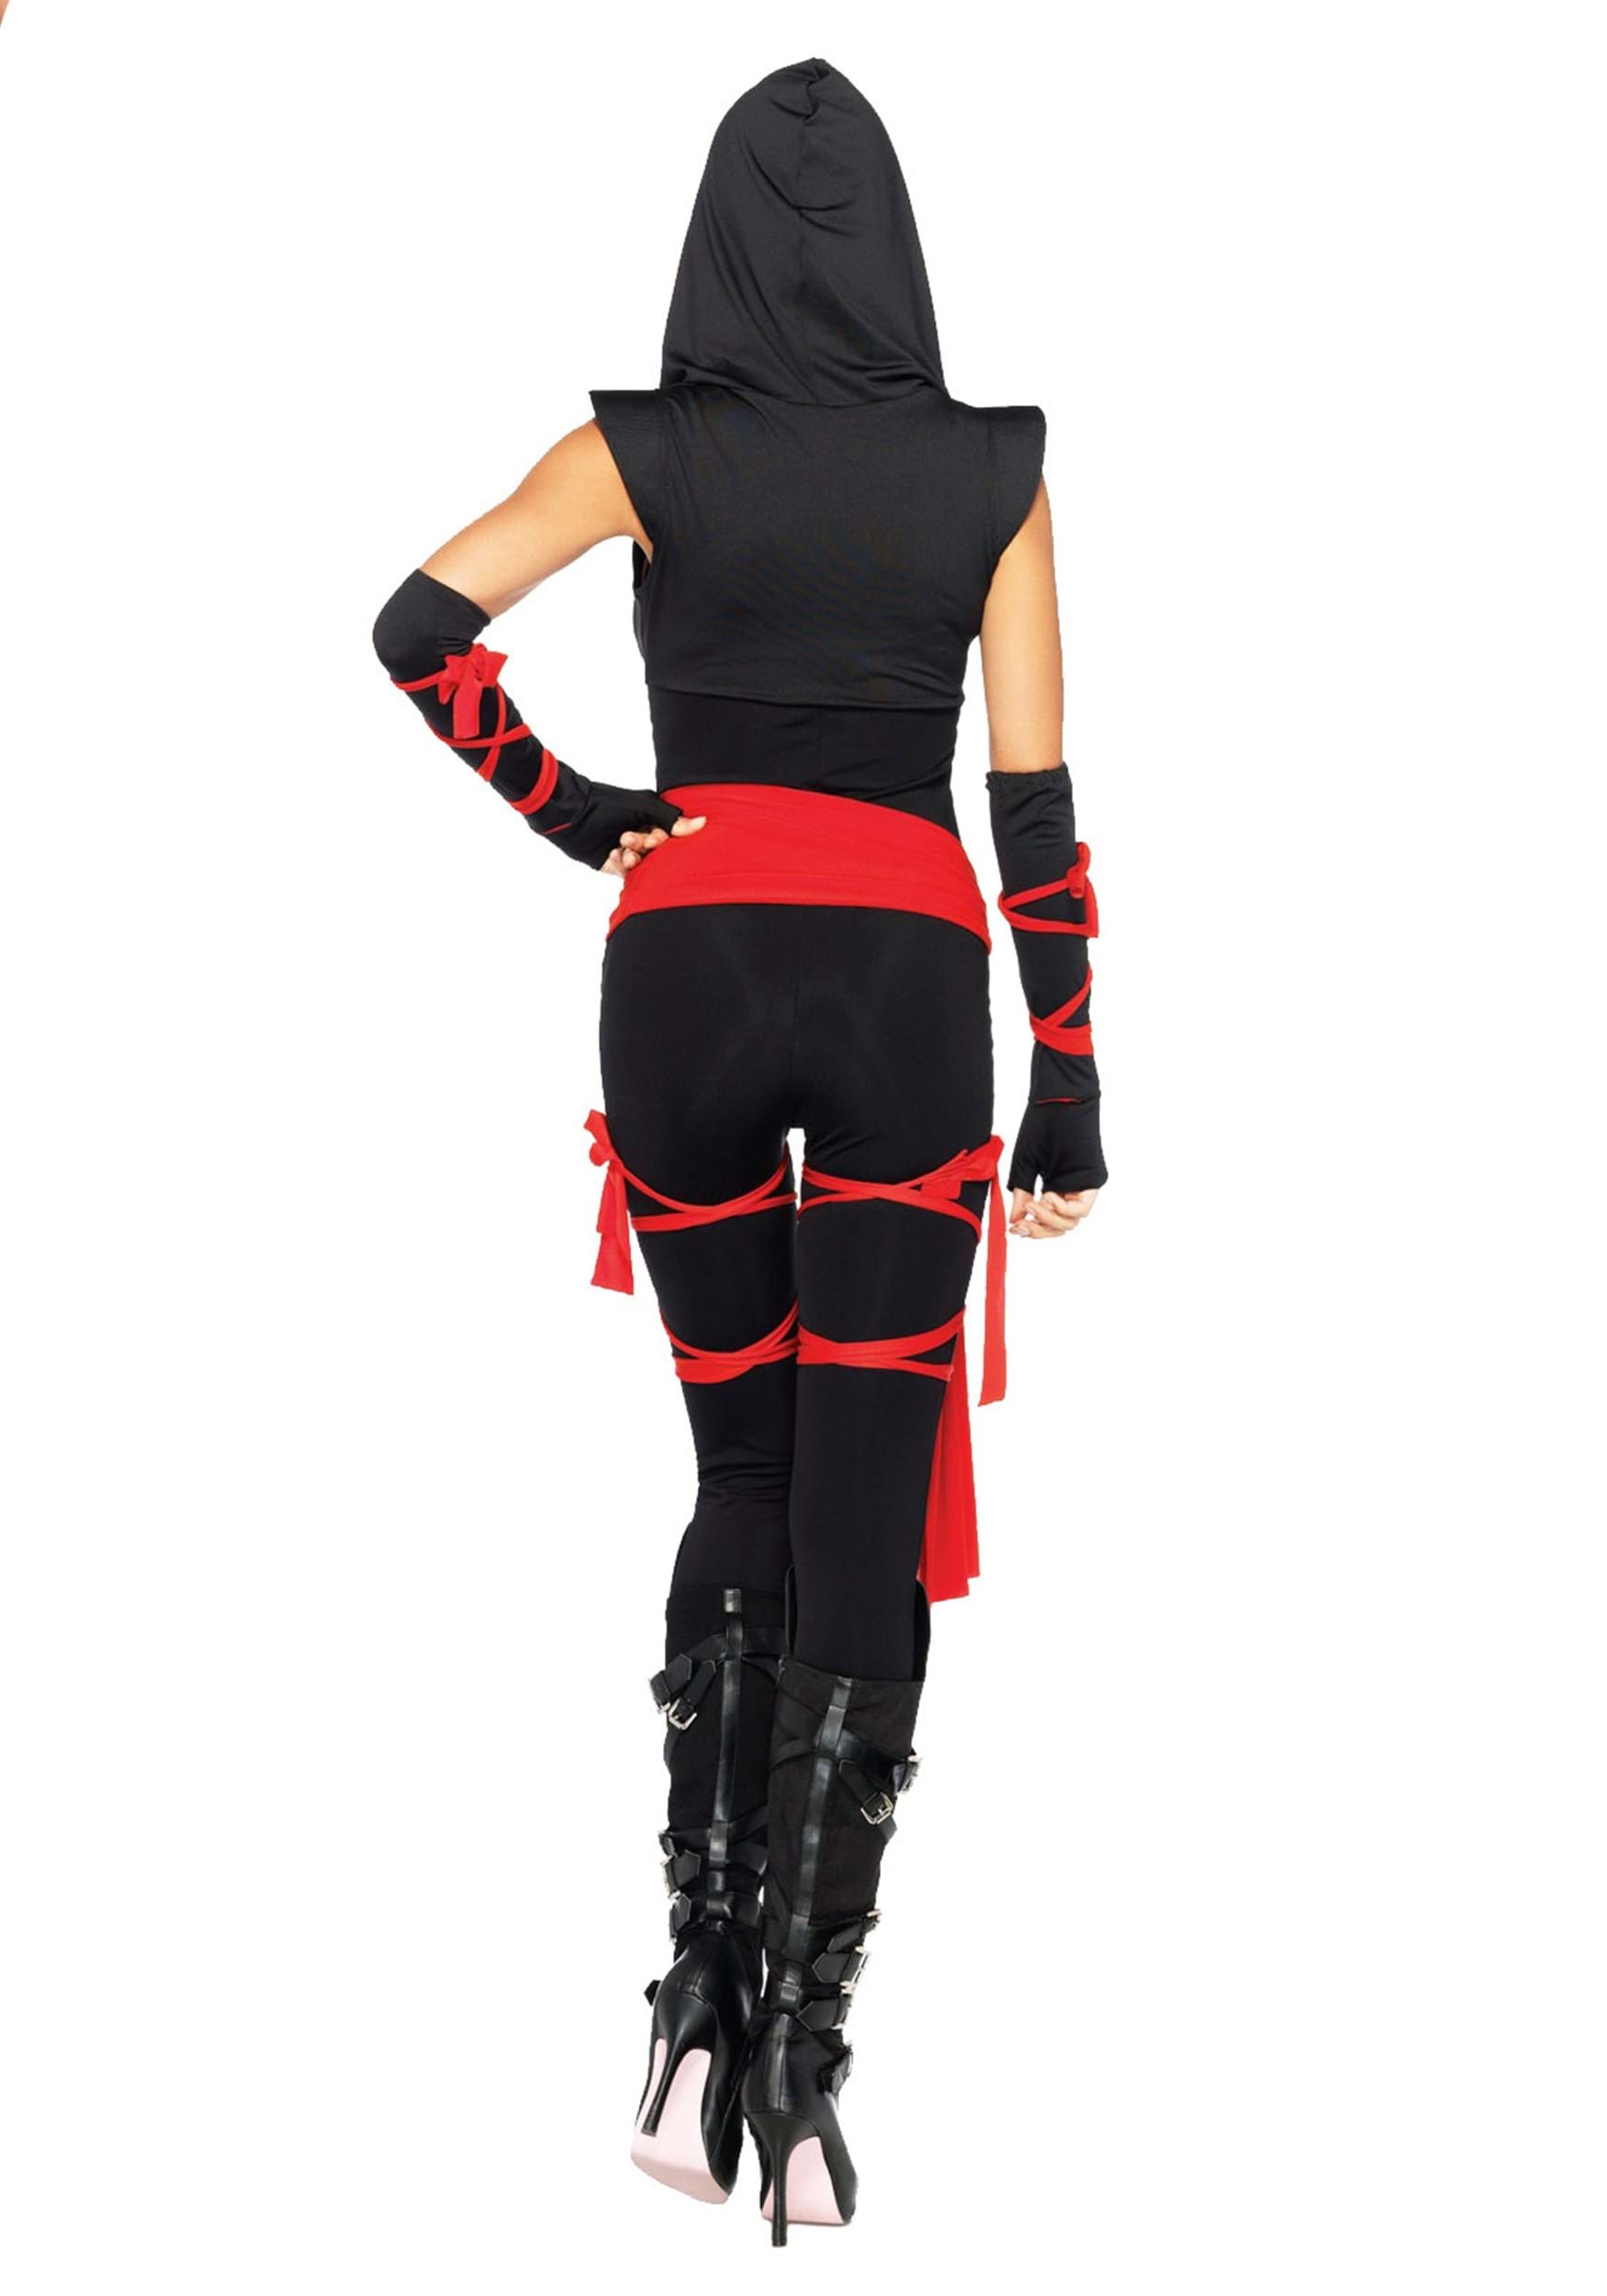 Sexy Deadly Ninja Costume for Women